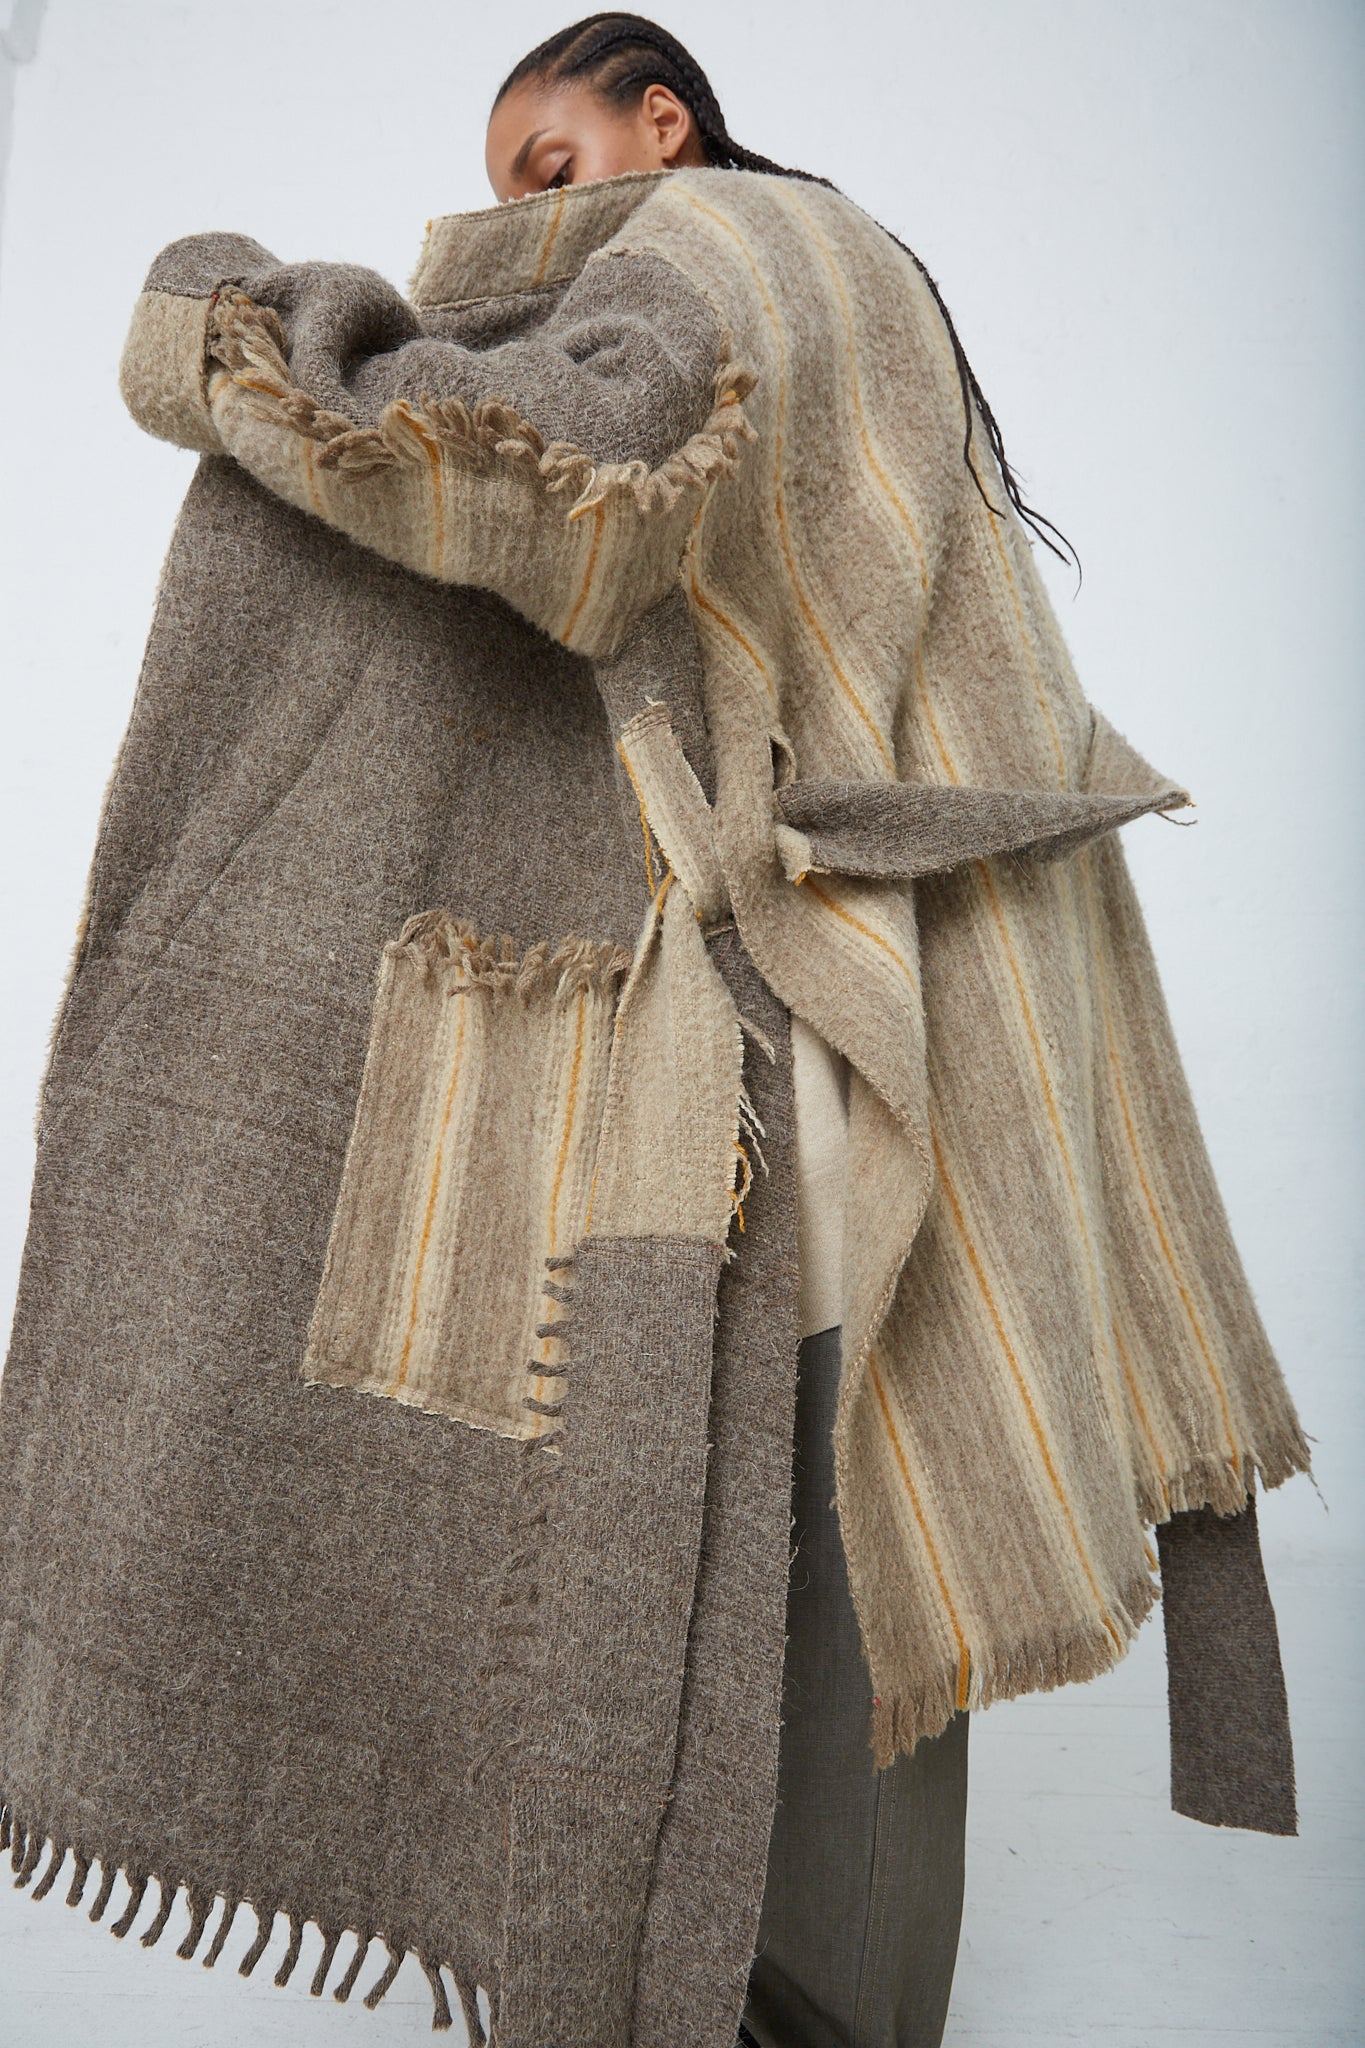 A woman wearing a Thank You Have A Good Day Wool Blanket Swing Trench. Coat open.